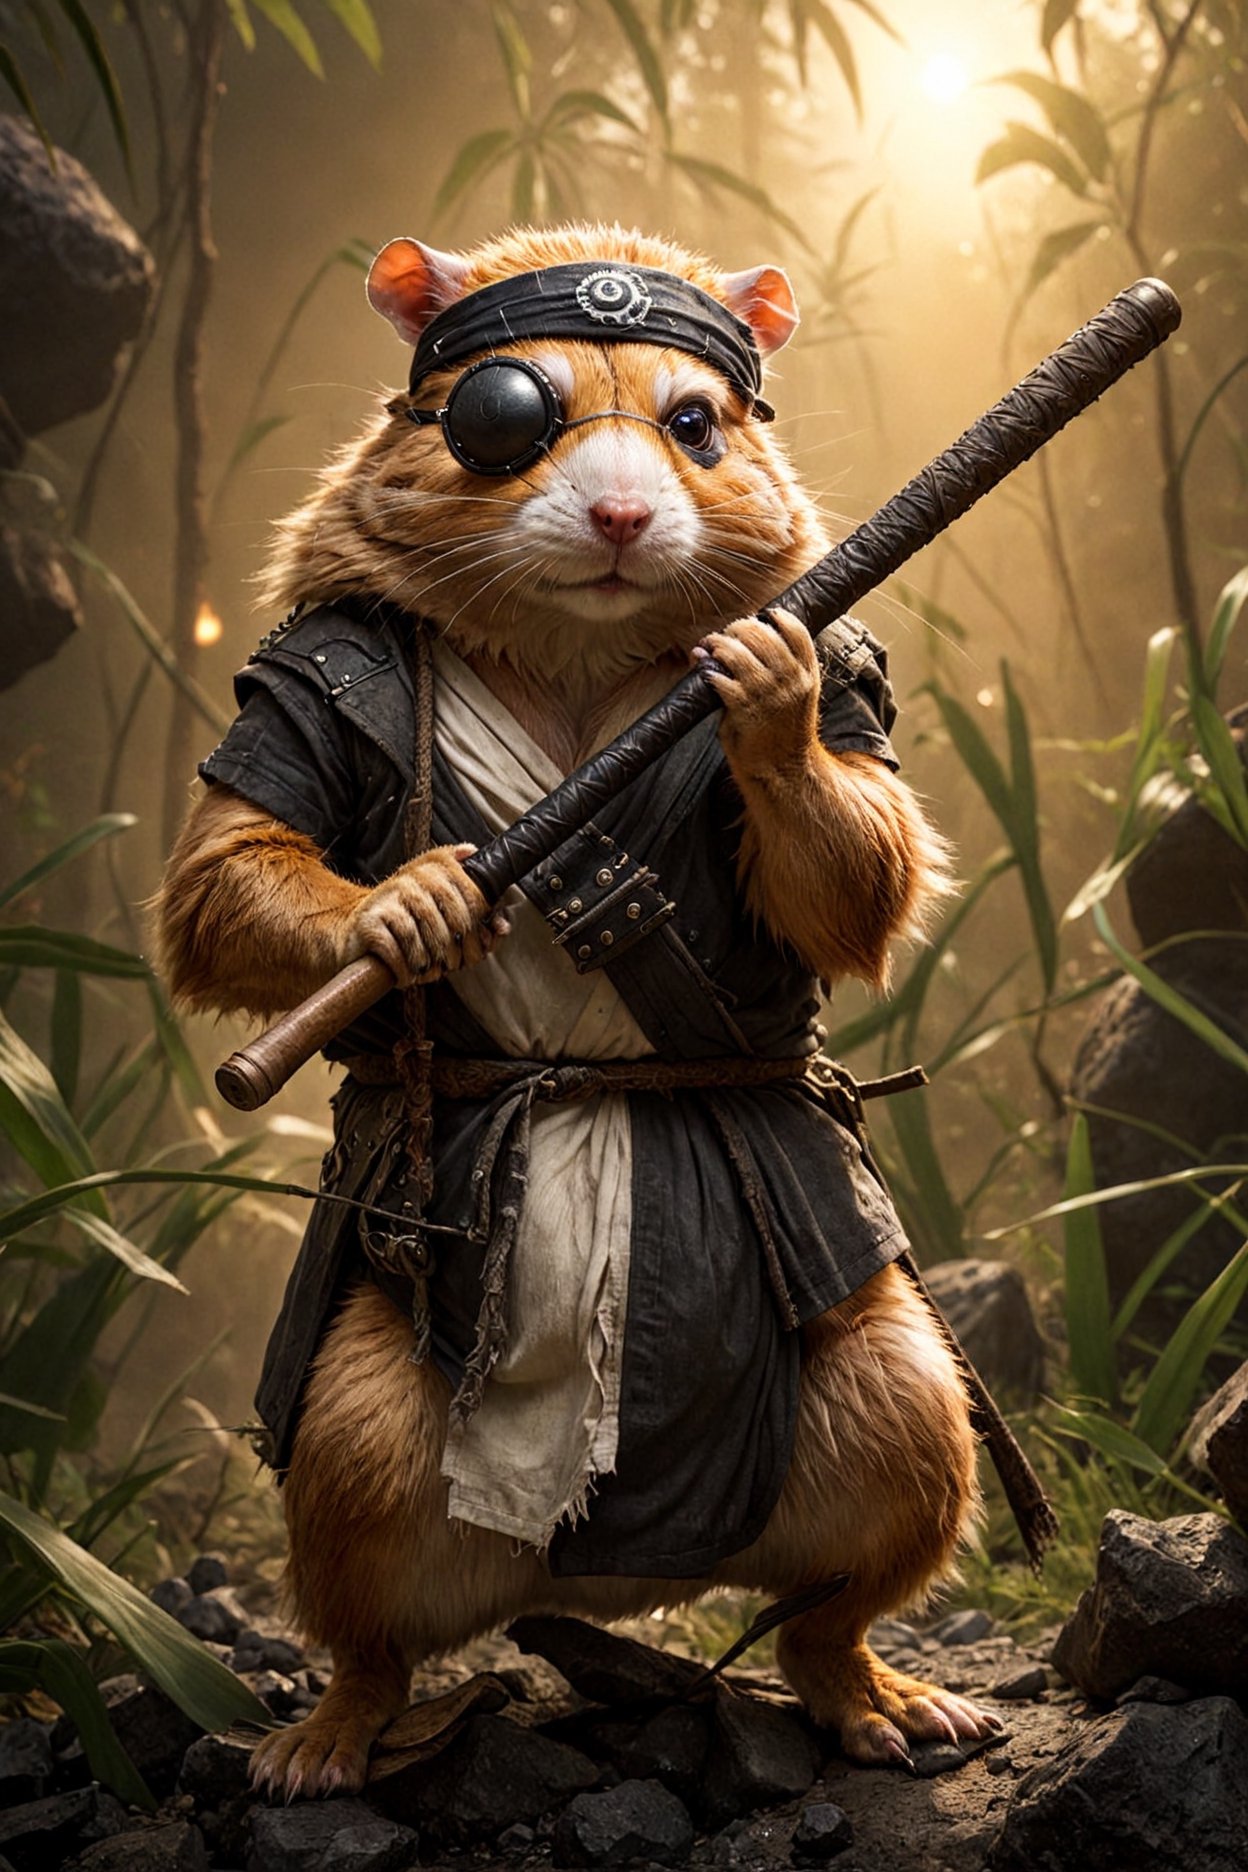 a (muscular:0.5) furry (martial arts master:0.7) battle (hamster:1.2) mafioso (monk:0.5) holding a crude club studded with dark rocks. He has one eye and a bandana (eye patch:1.3). His fur is blackened, but he wields the baseball bat with fierce determination. The morning sunrise highlights him with impeccable (cinematic backlighting) as it burns away the morning mist of the jungle. perfectly drawn hands, cinematic scene, dramatic lighting, hyperdetailed photography, soft light, full body portrait, cover. shot on Blackmagic Pocket Cinema Camera 6K Pro and a Sigma Cine Prime 35mm f/1.4 lens (f/4.0, moderate ISO)